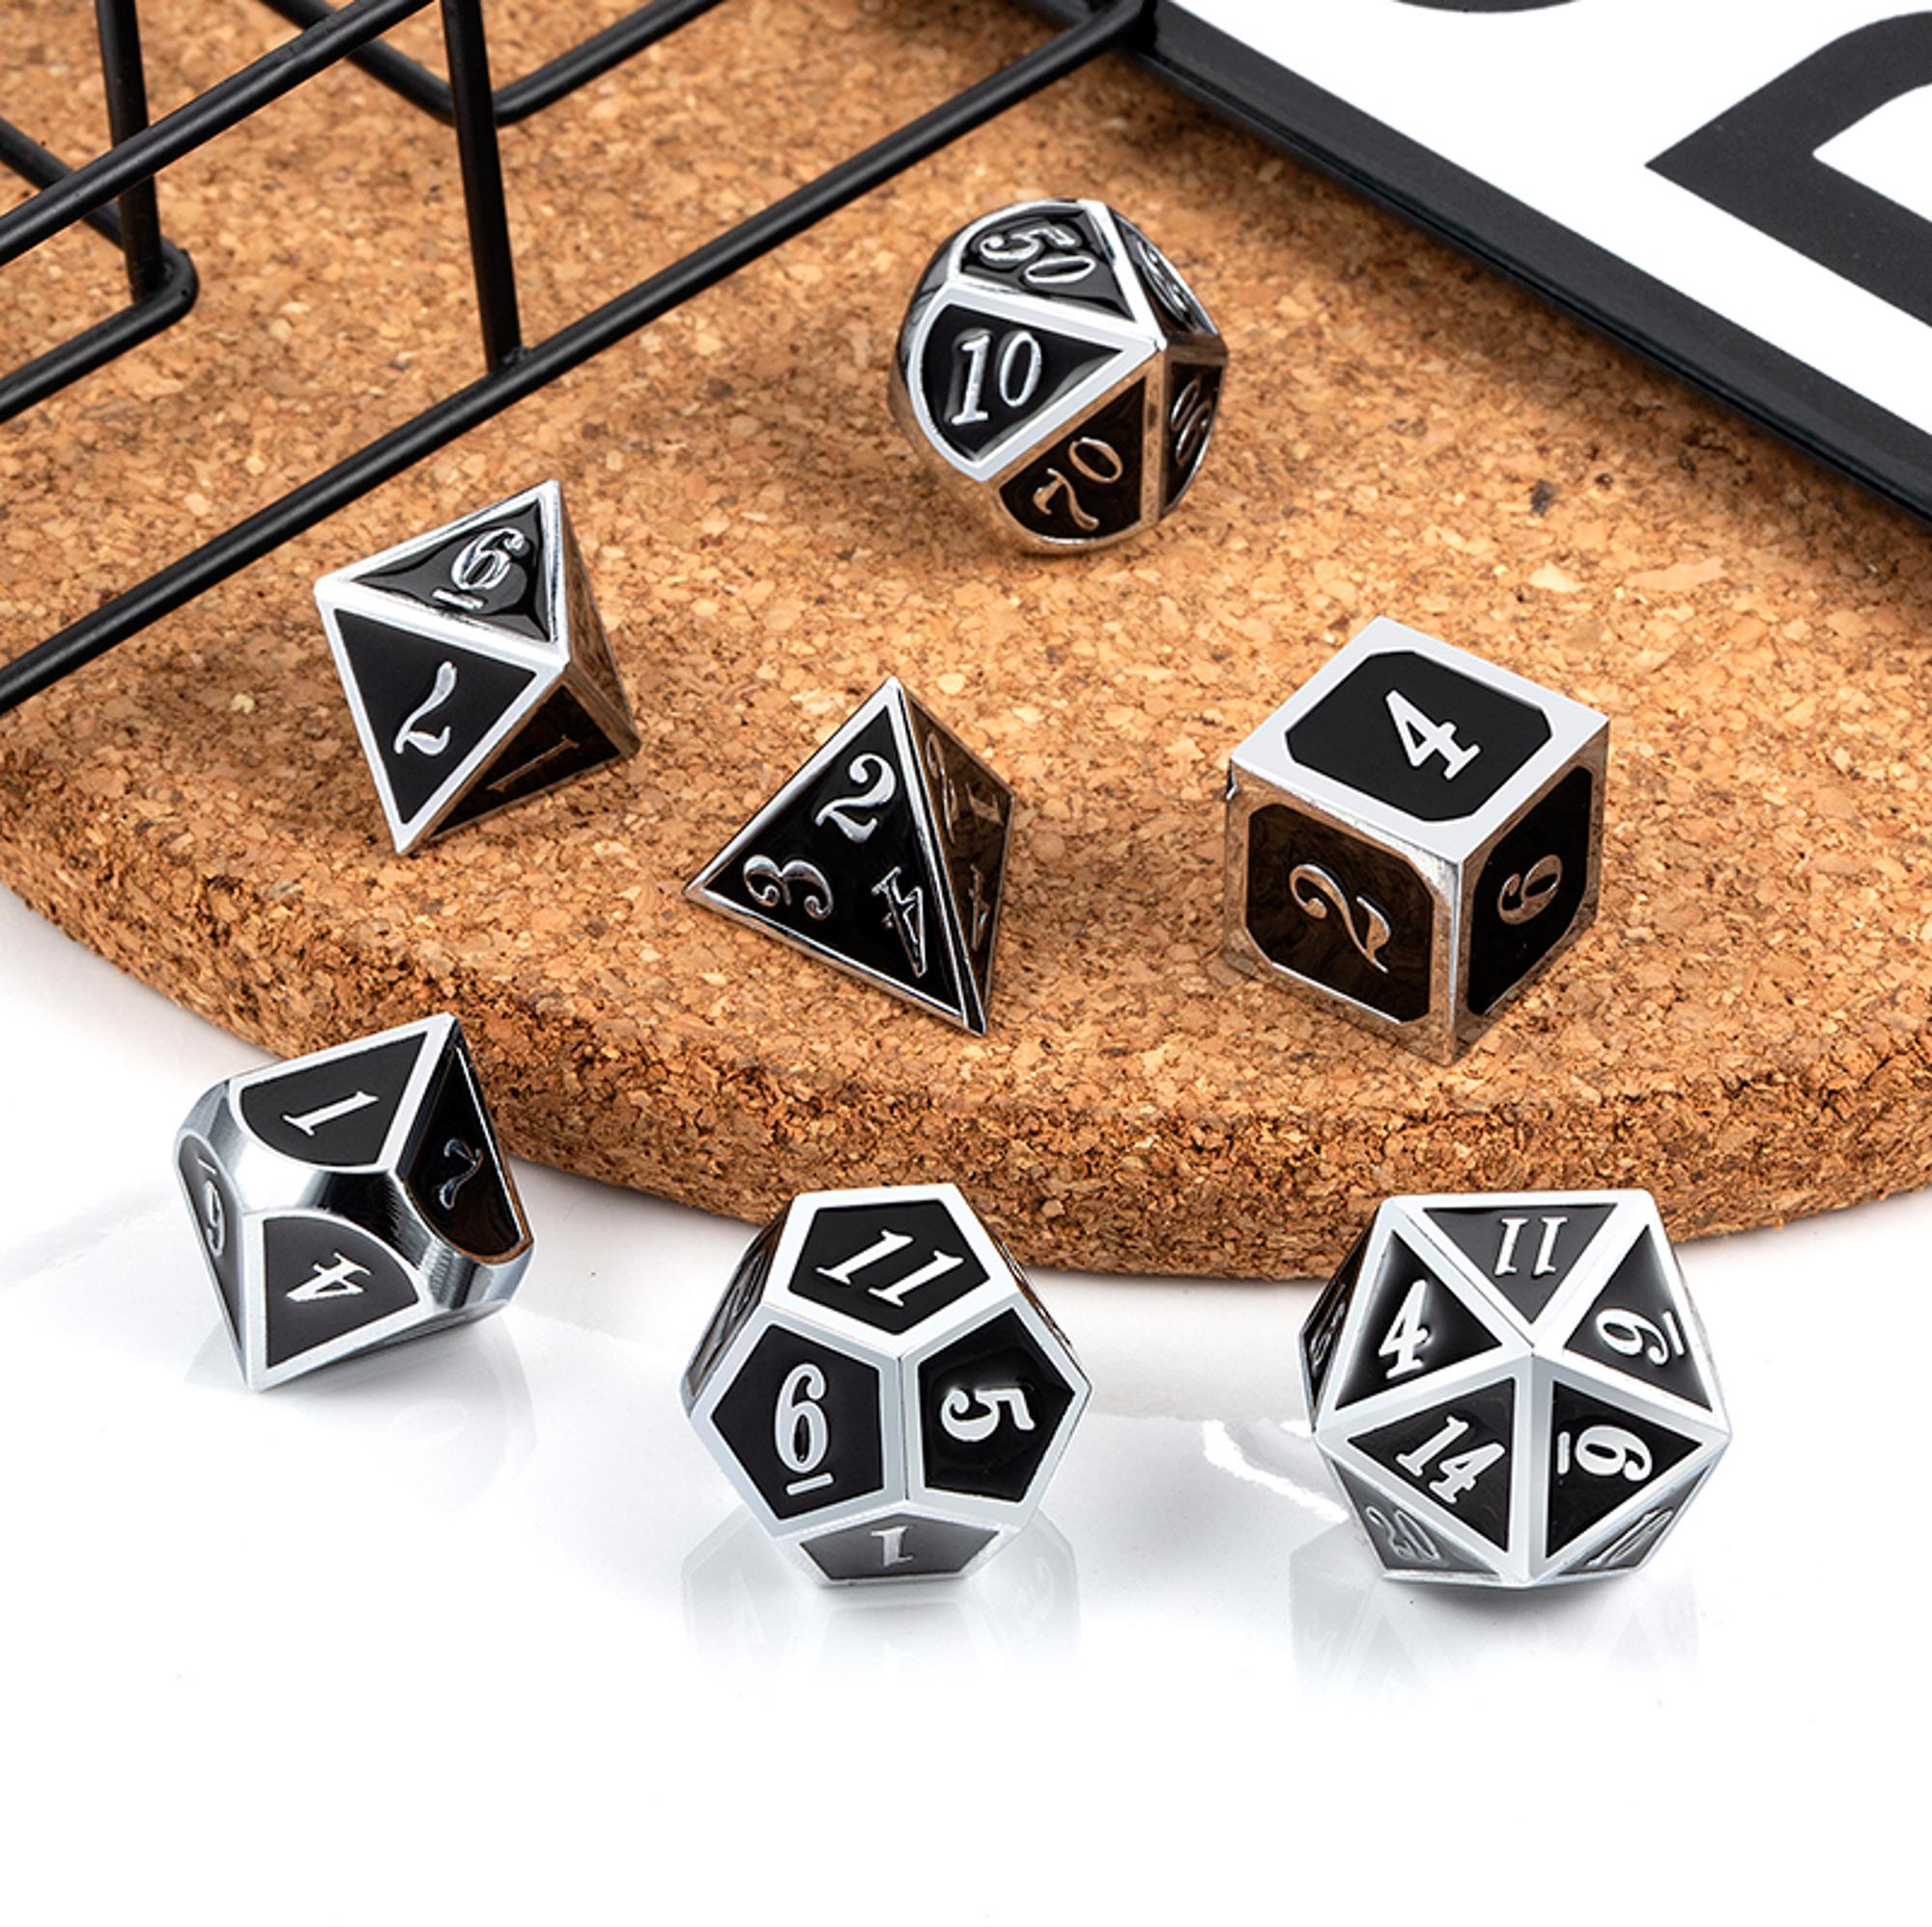 Dice Habit Polyhedral Metal and Enamel 7 Die Set - Color Shift Black to Red w/ Silver Numbering